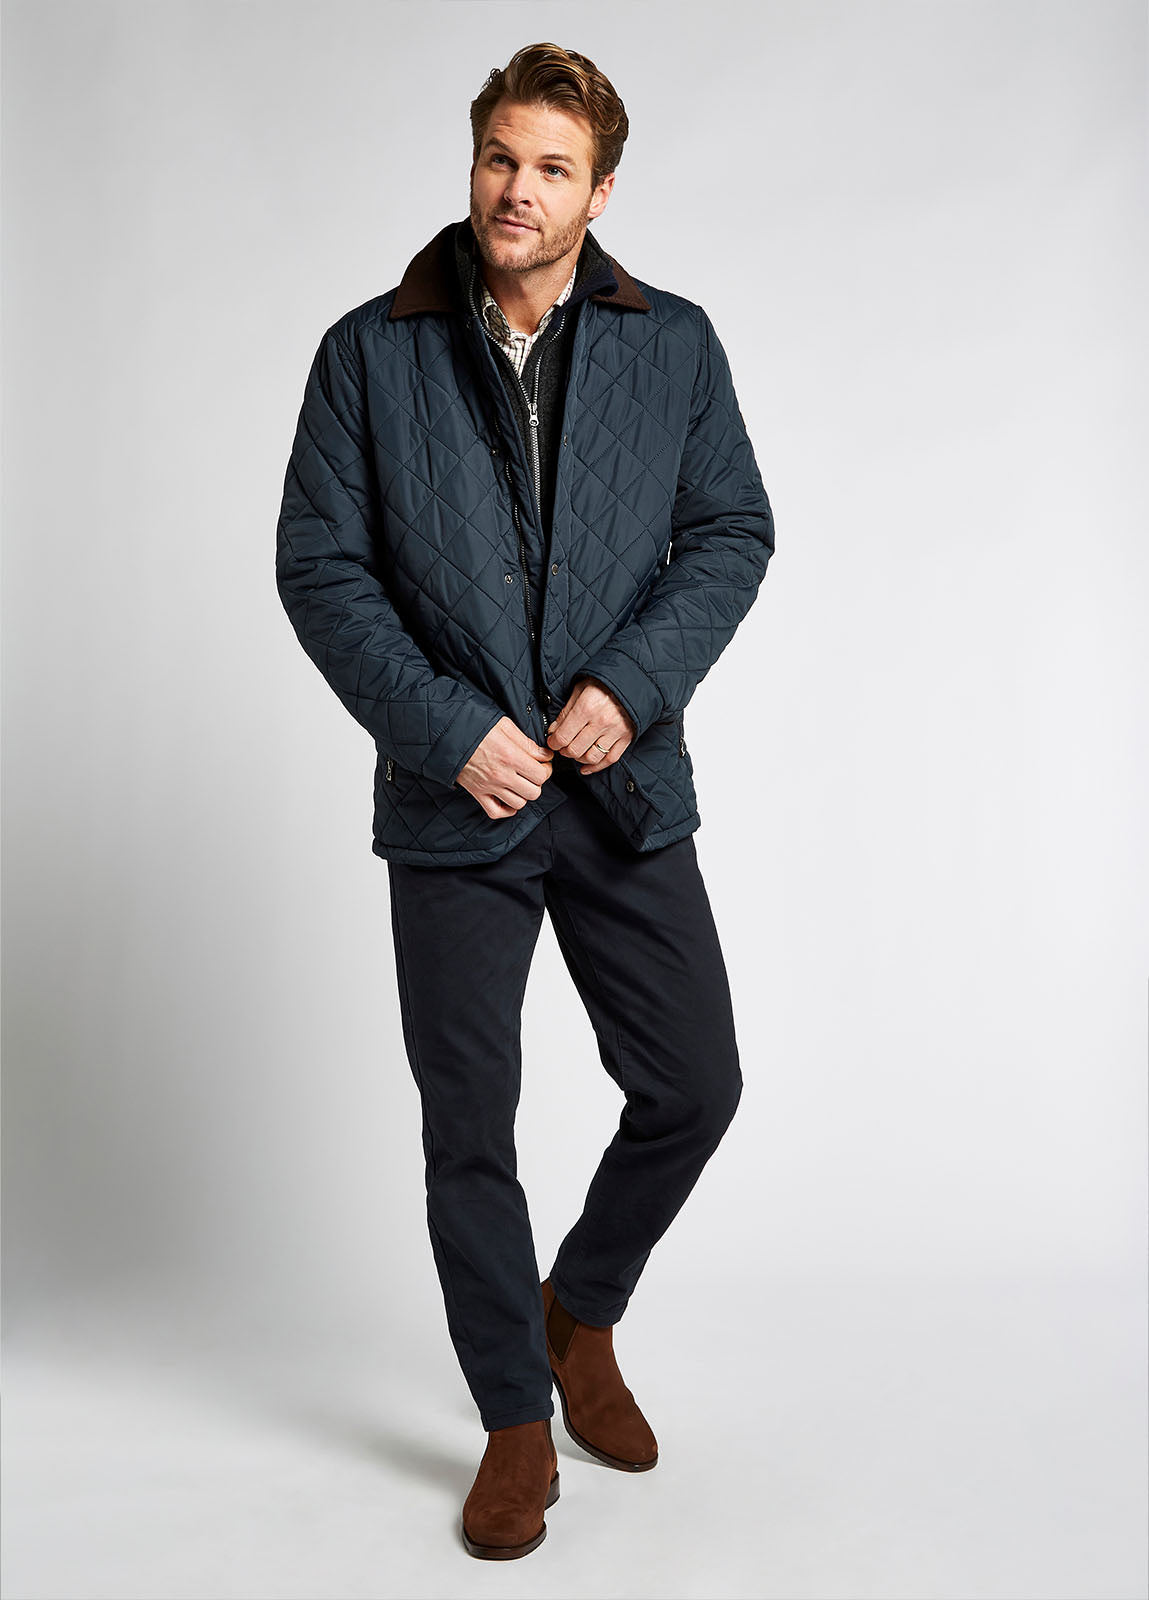 Dubarry Mountusher Quilted Jacket Navy